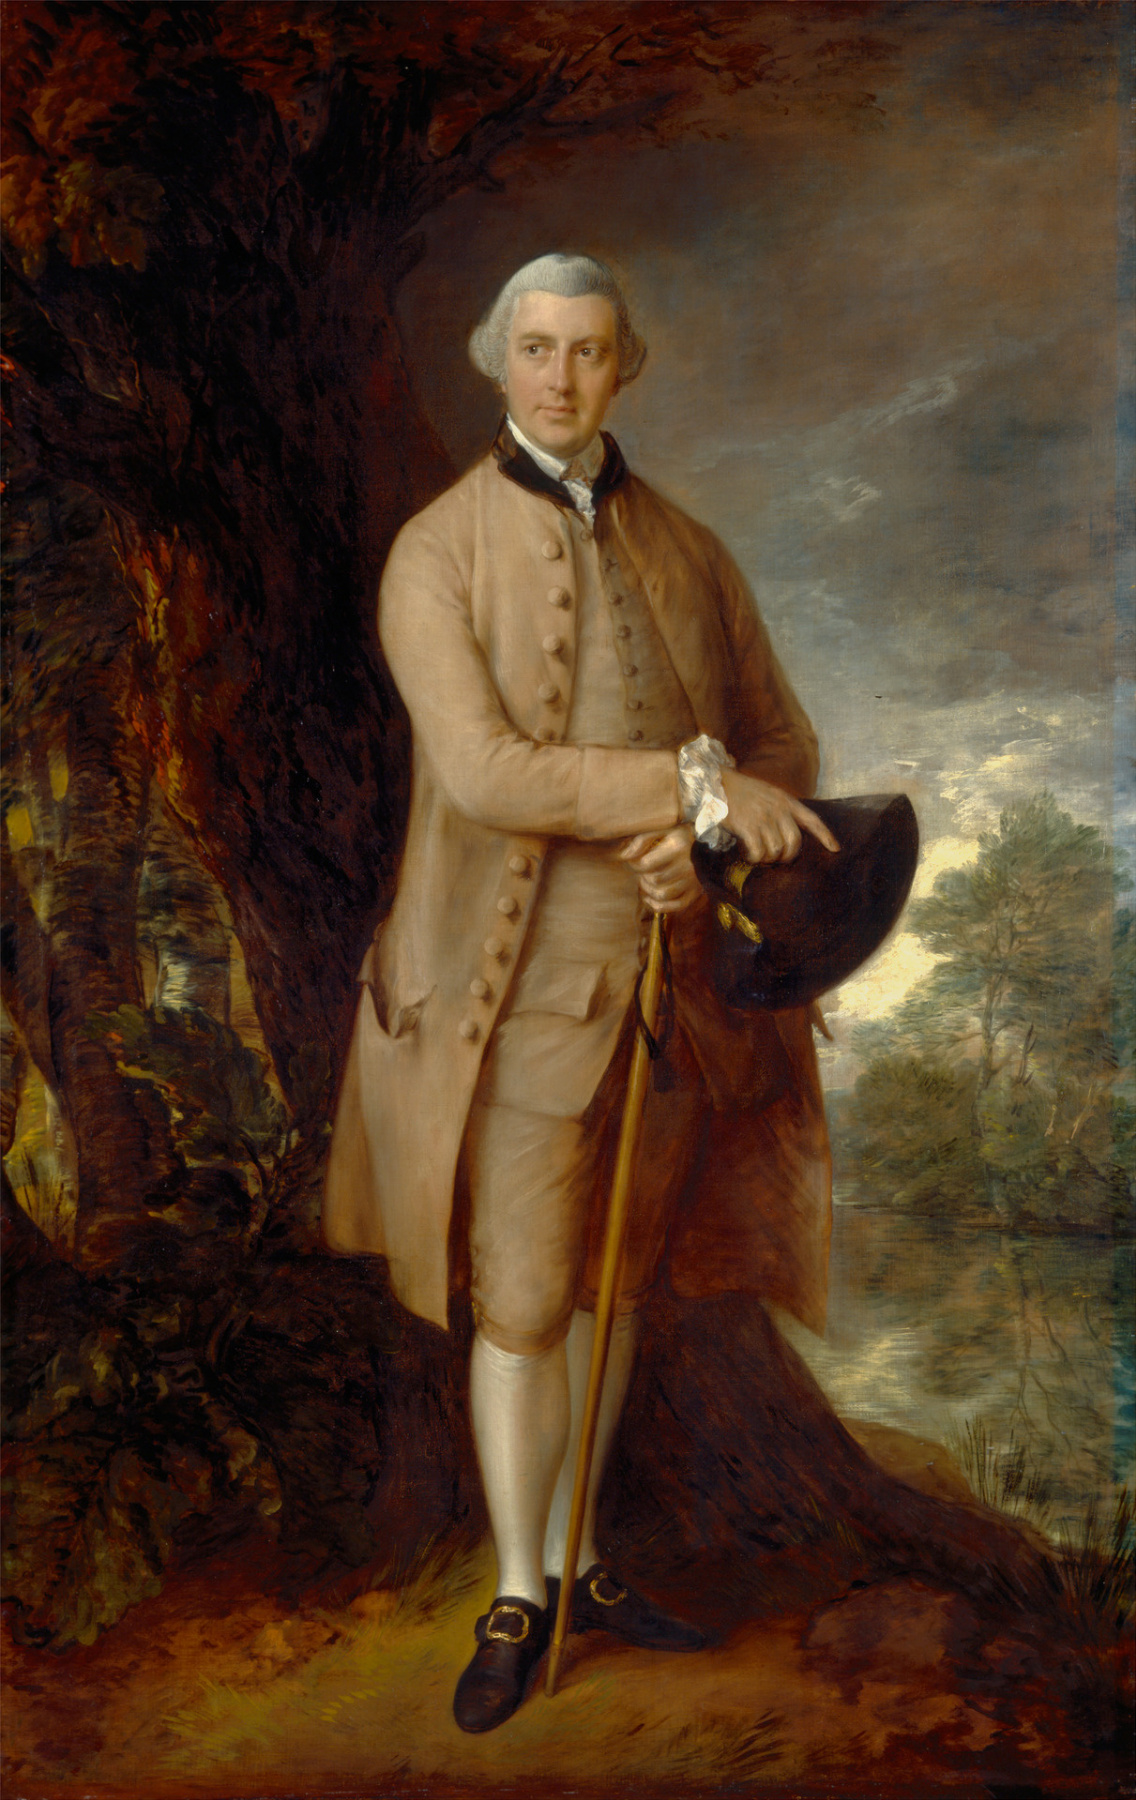 Thomas Gainsborough. William Johnstone Pulteney, fifth Lord Pulteney